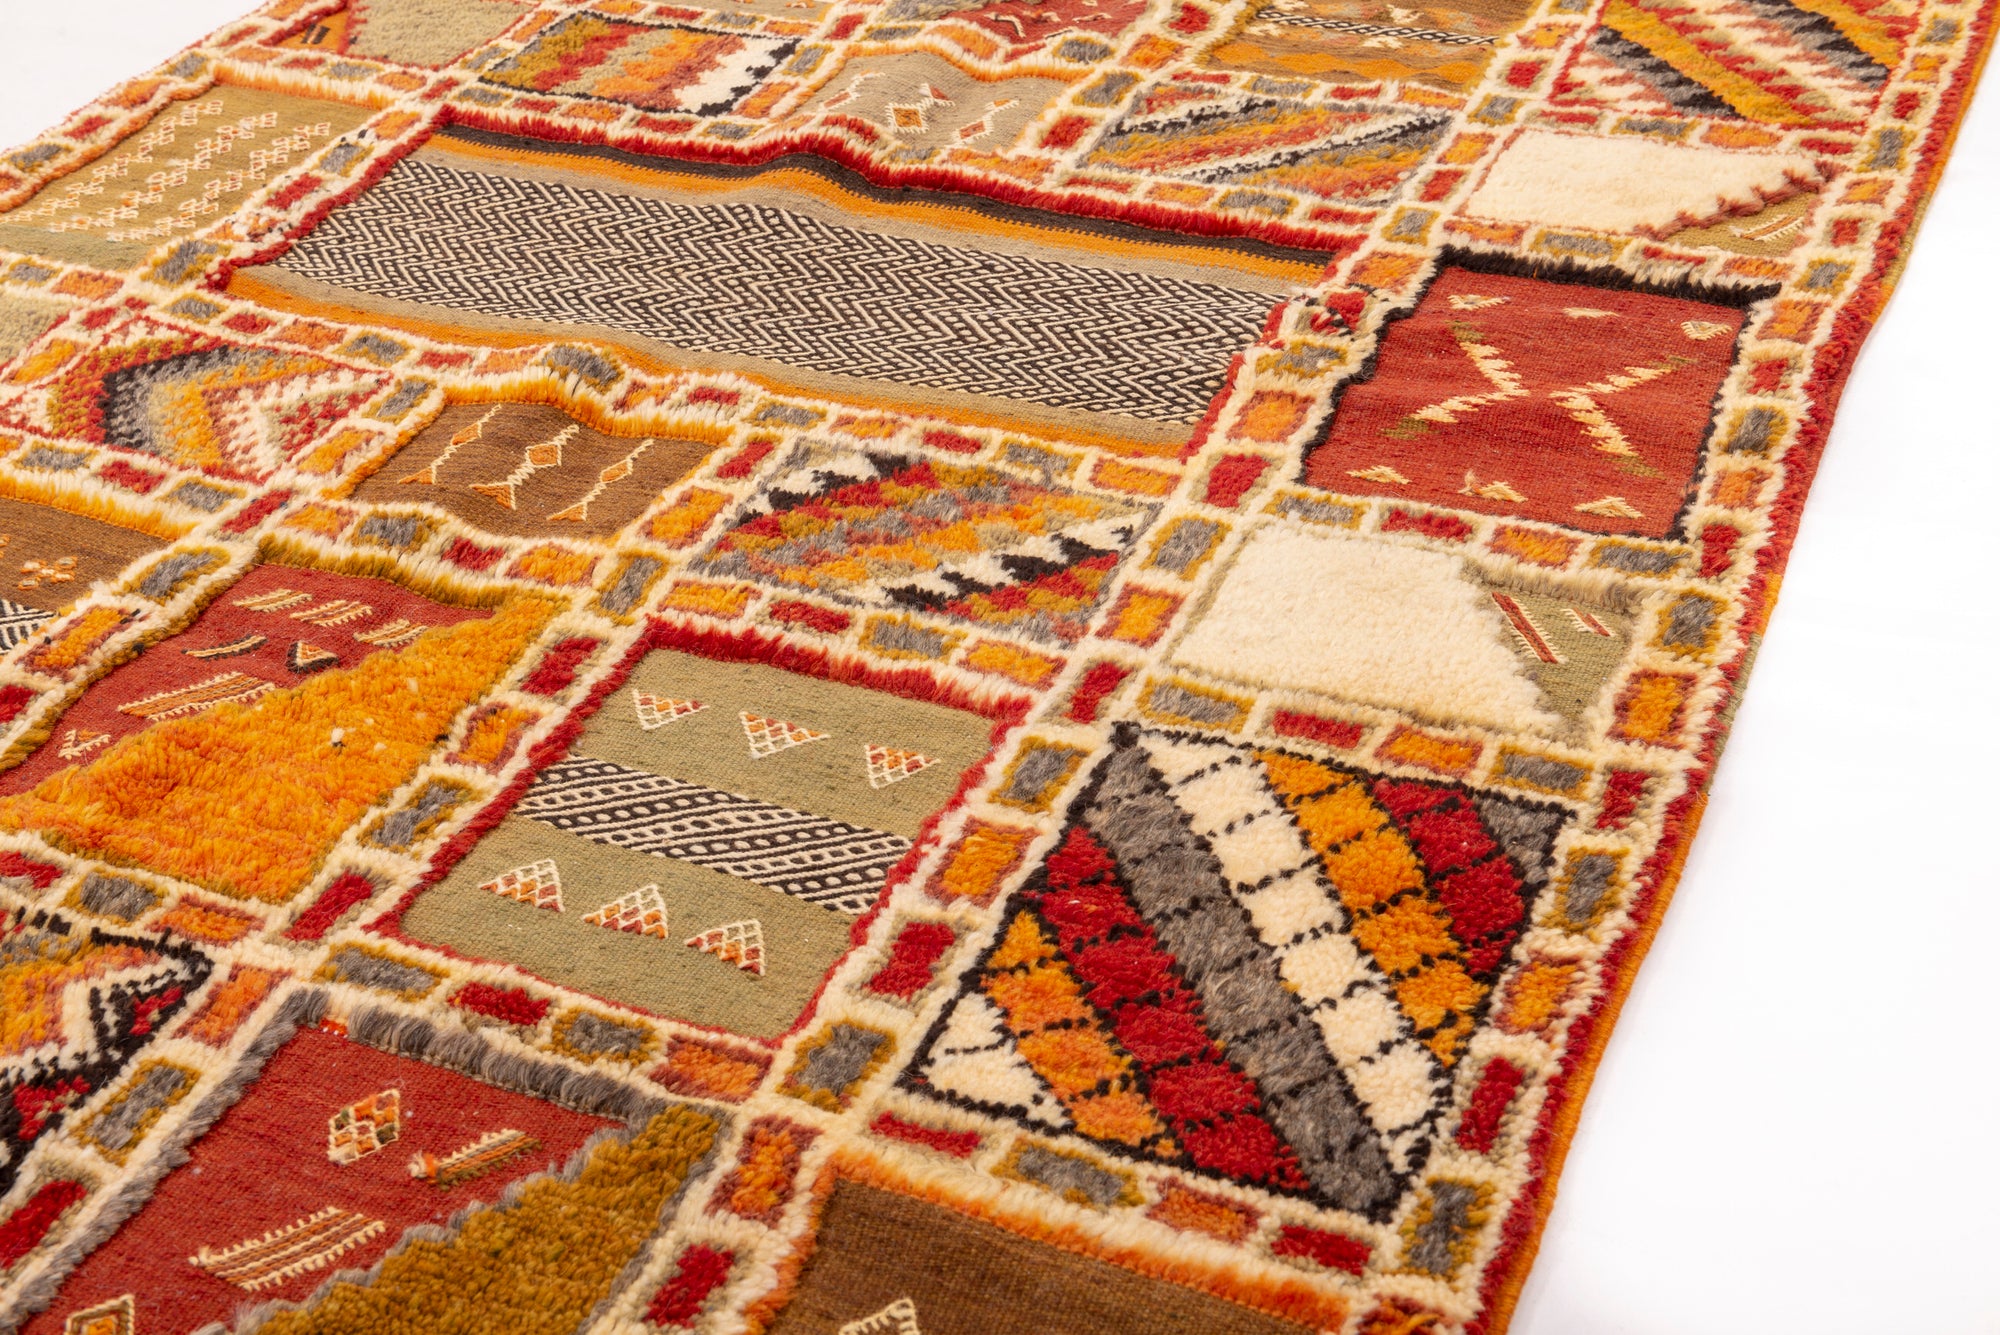 Ignite your space with our Sienna Spark Glawi Rug. This classic Glawi-style masterpiece boasts a warm yellowish-orange tone and a captivating geometric square pattern. Elevate your decor with the timeless beauty and craftsmanship of this unique rug, bringing a touch of tradition and artistry to your home.